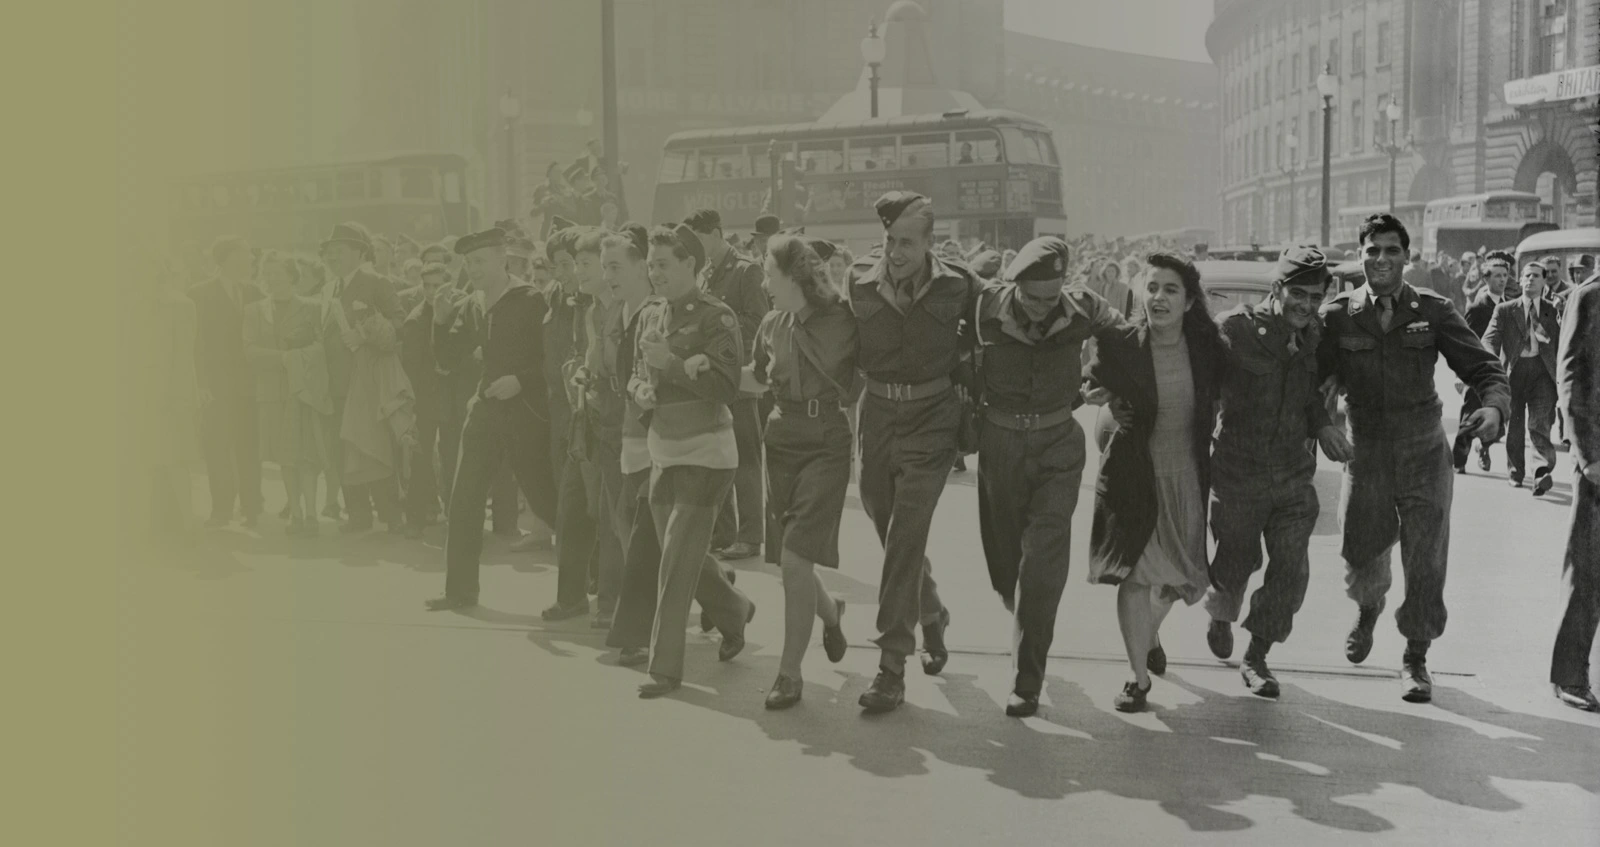 VJ Day celebrations in Piccadilly Circus, London